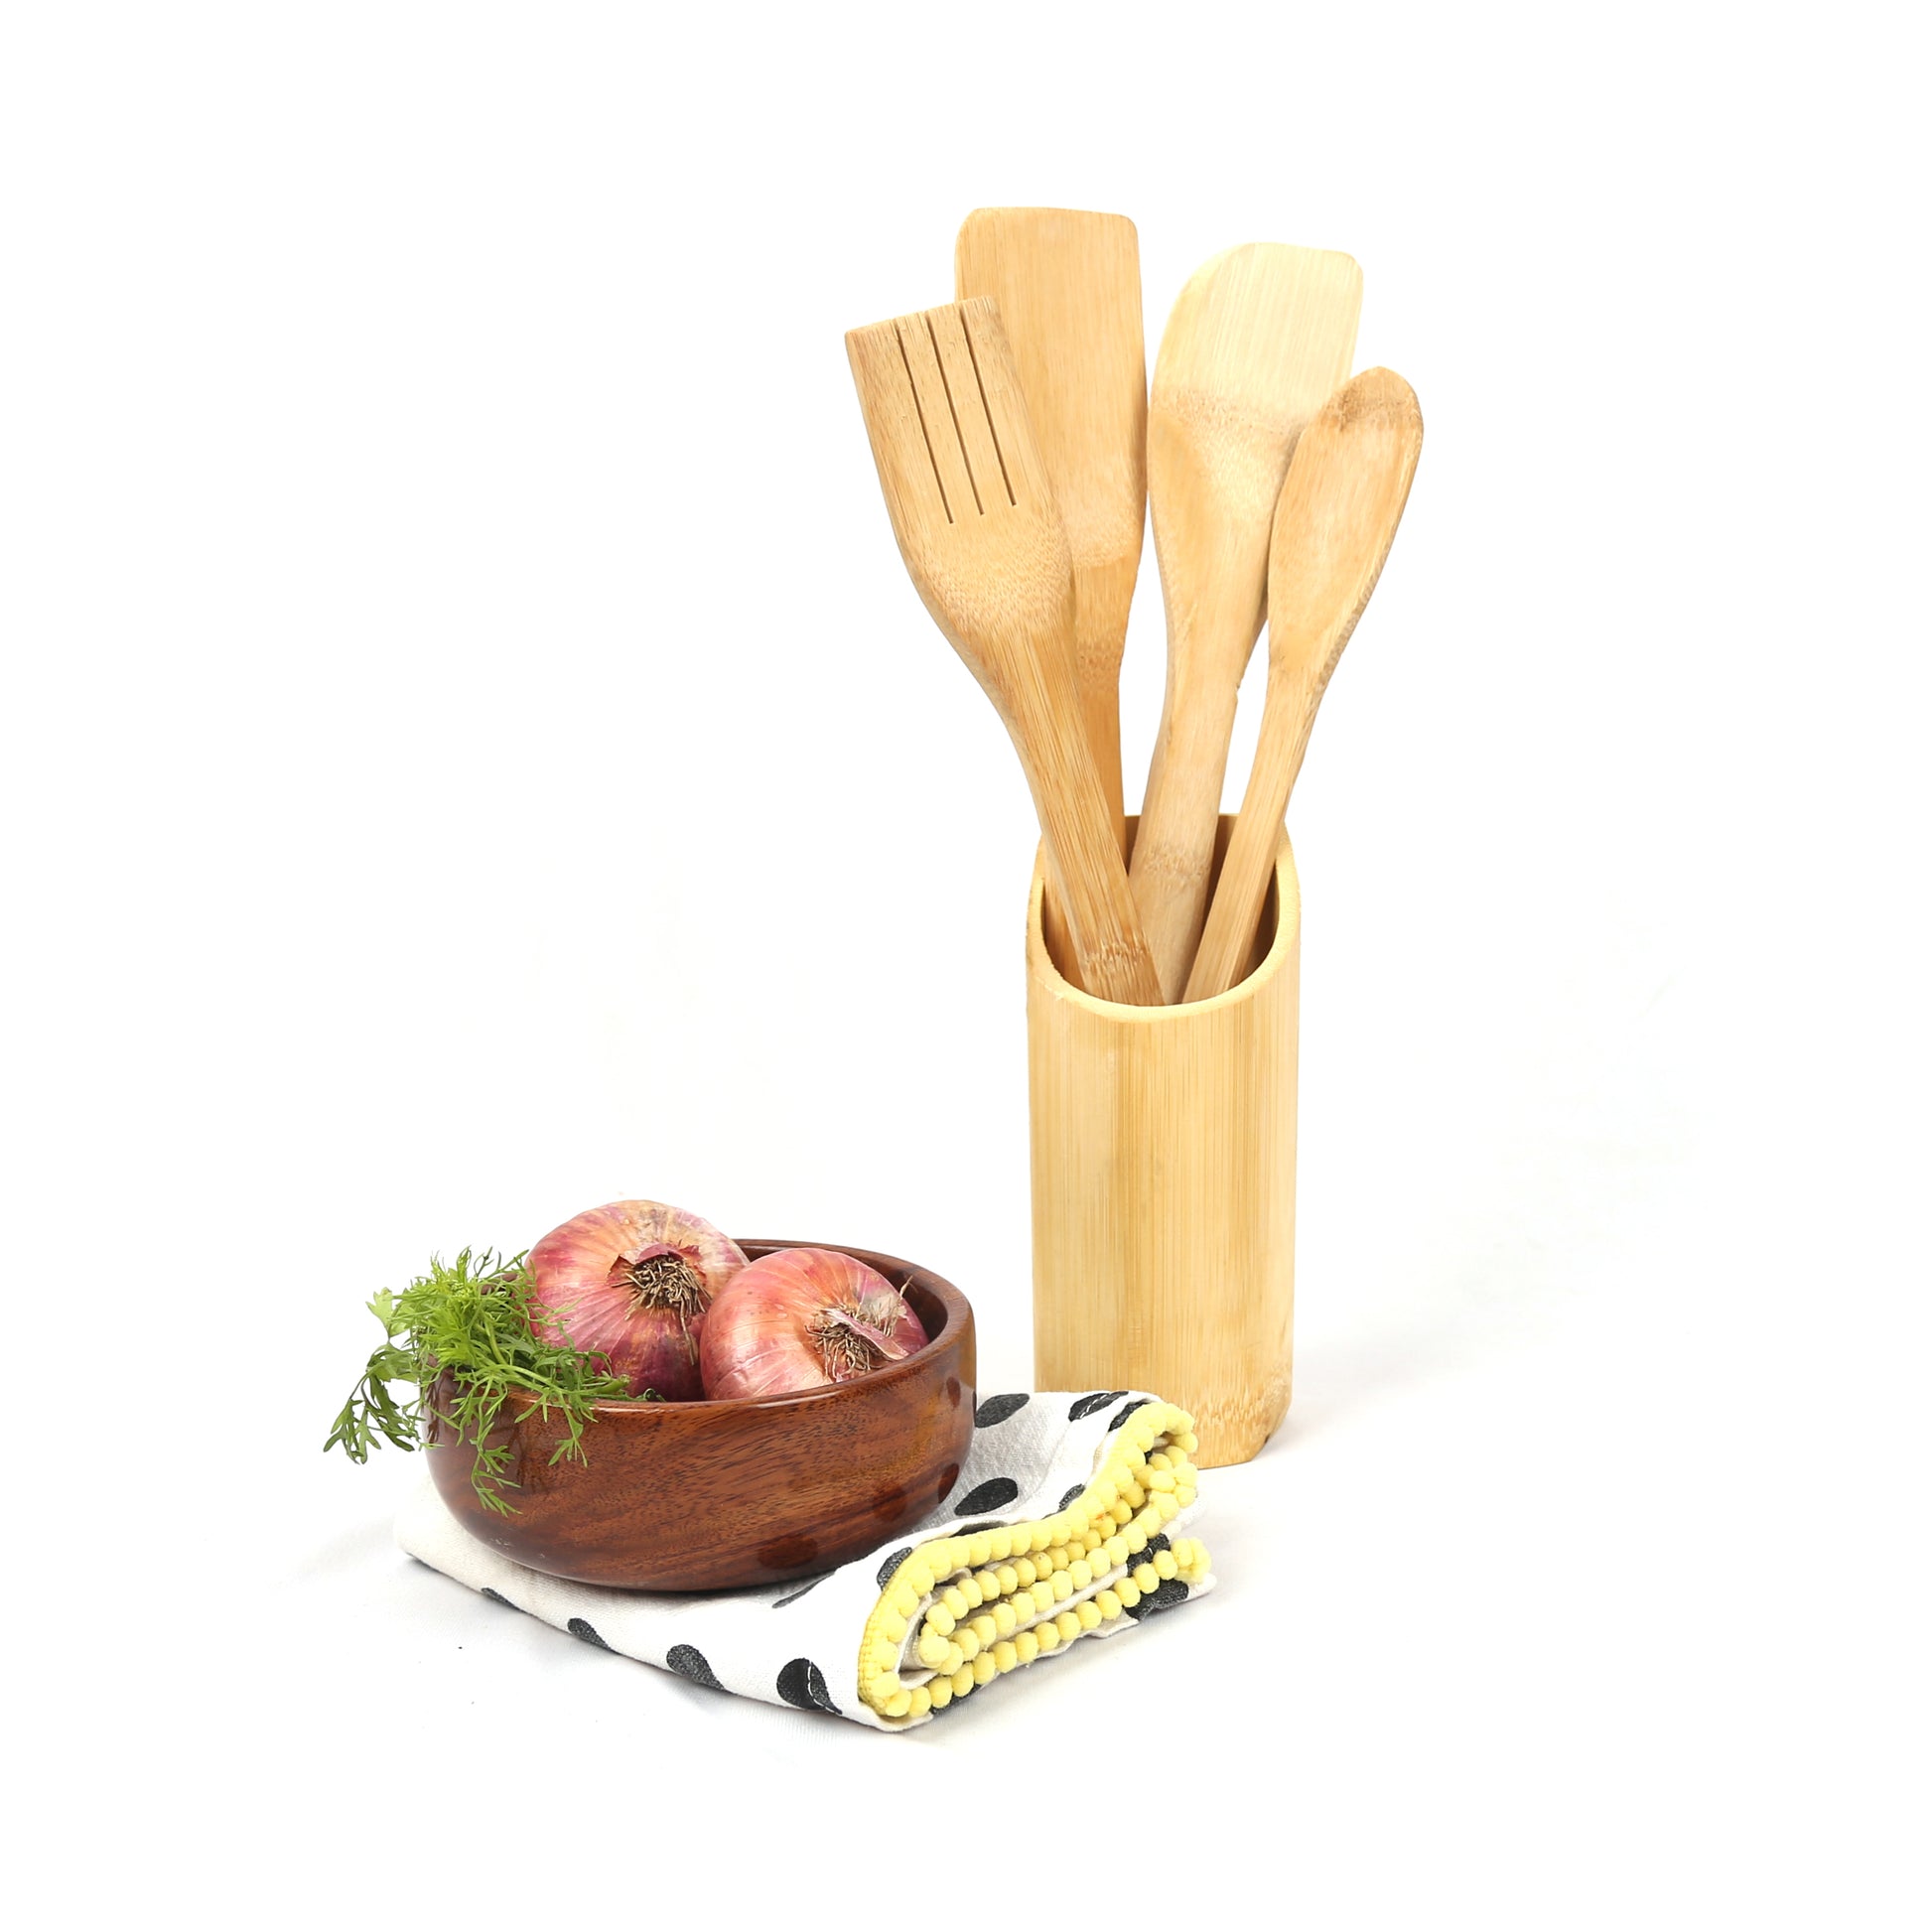 DaisyLife natural All Purpose Bare Bamboo Spoon with stand